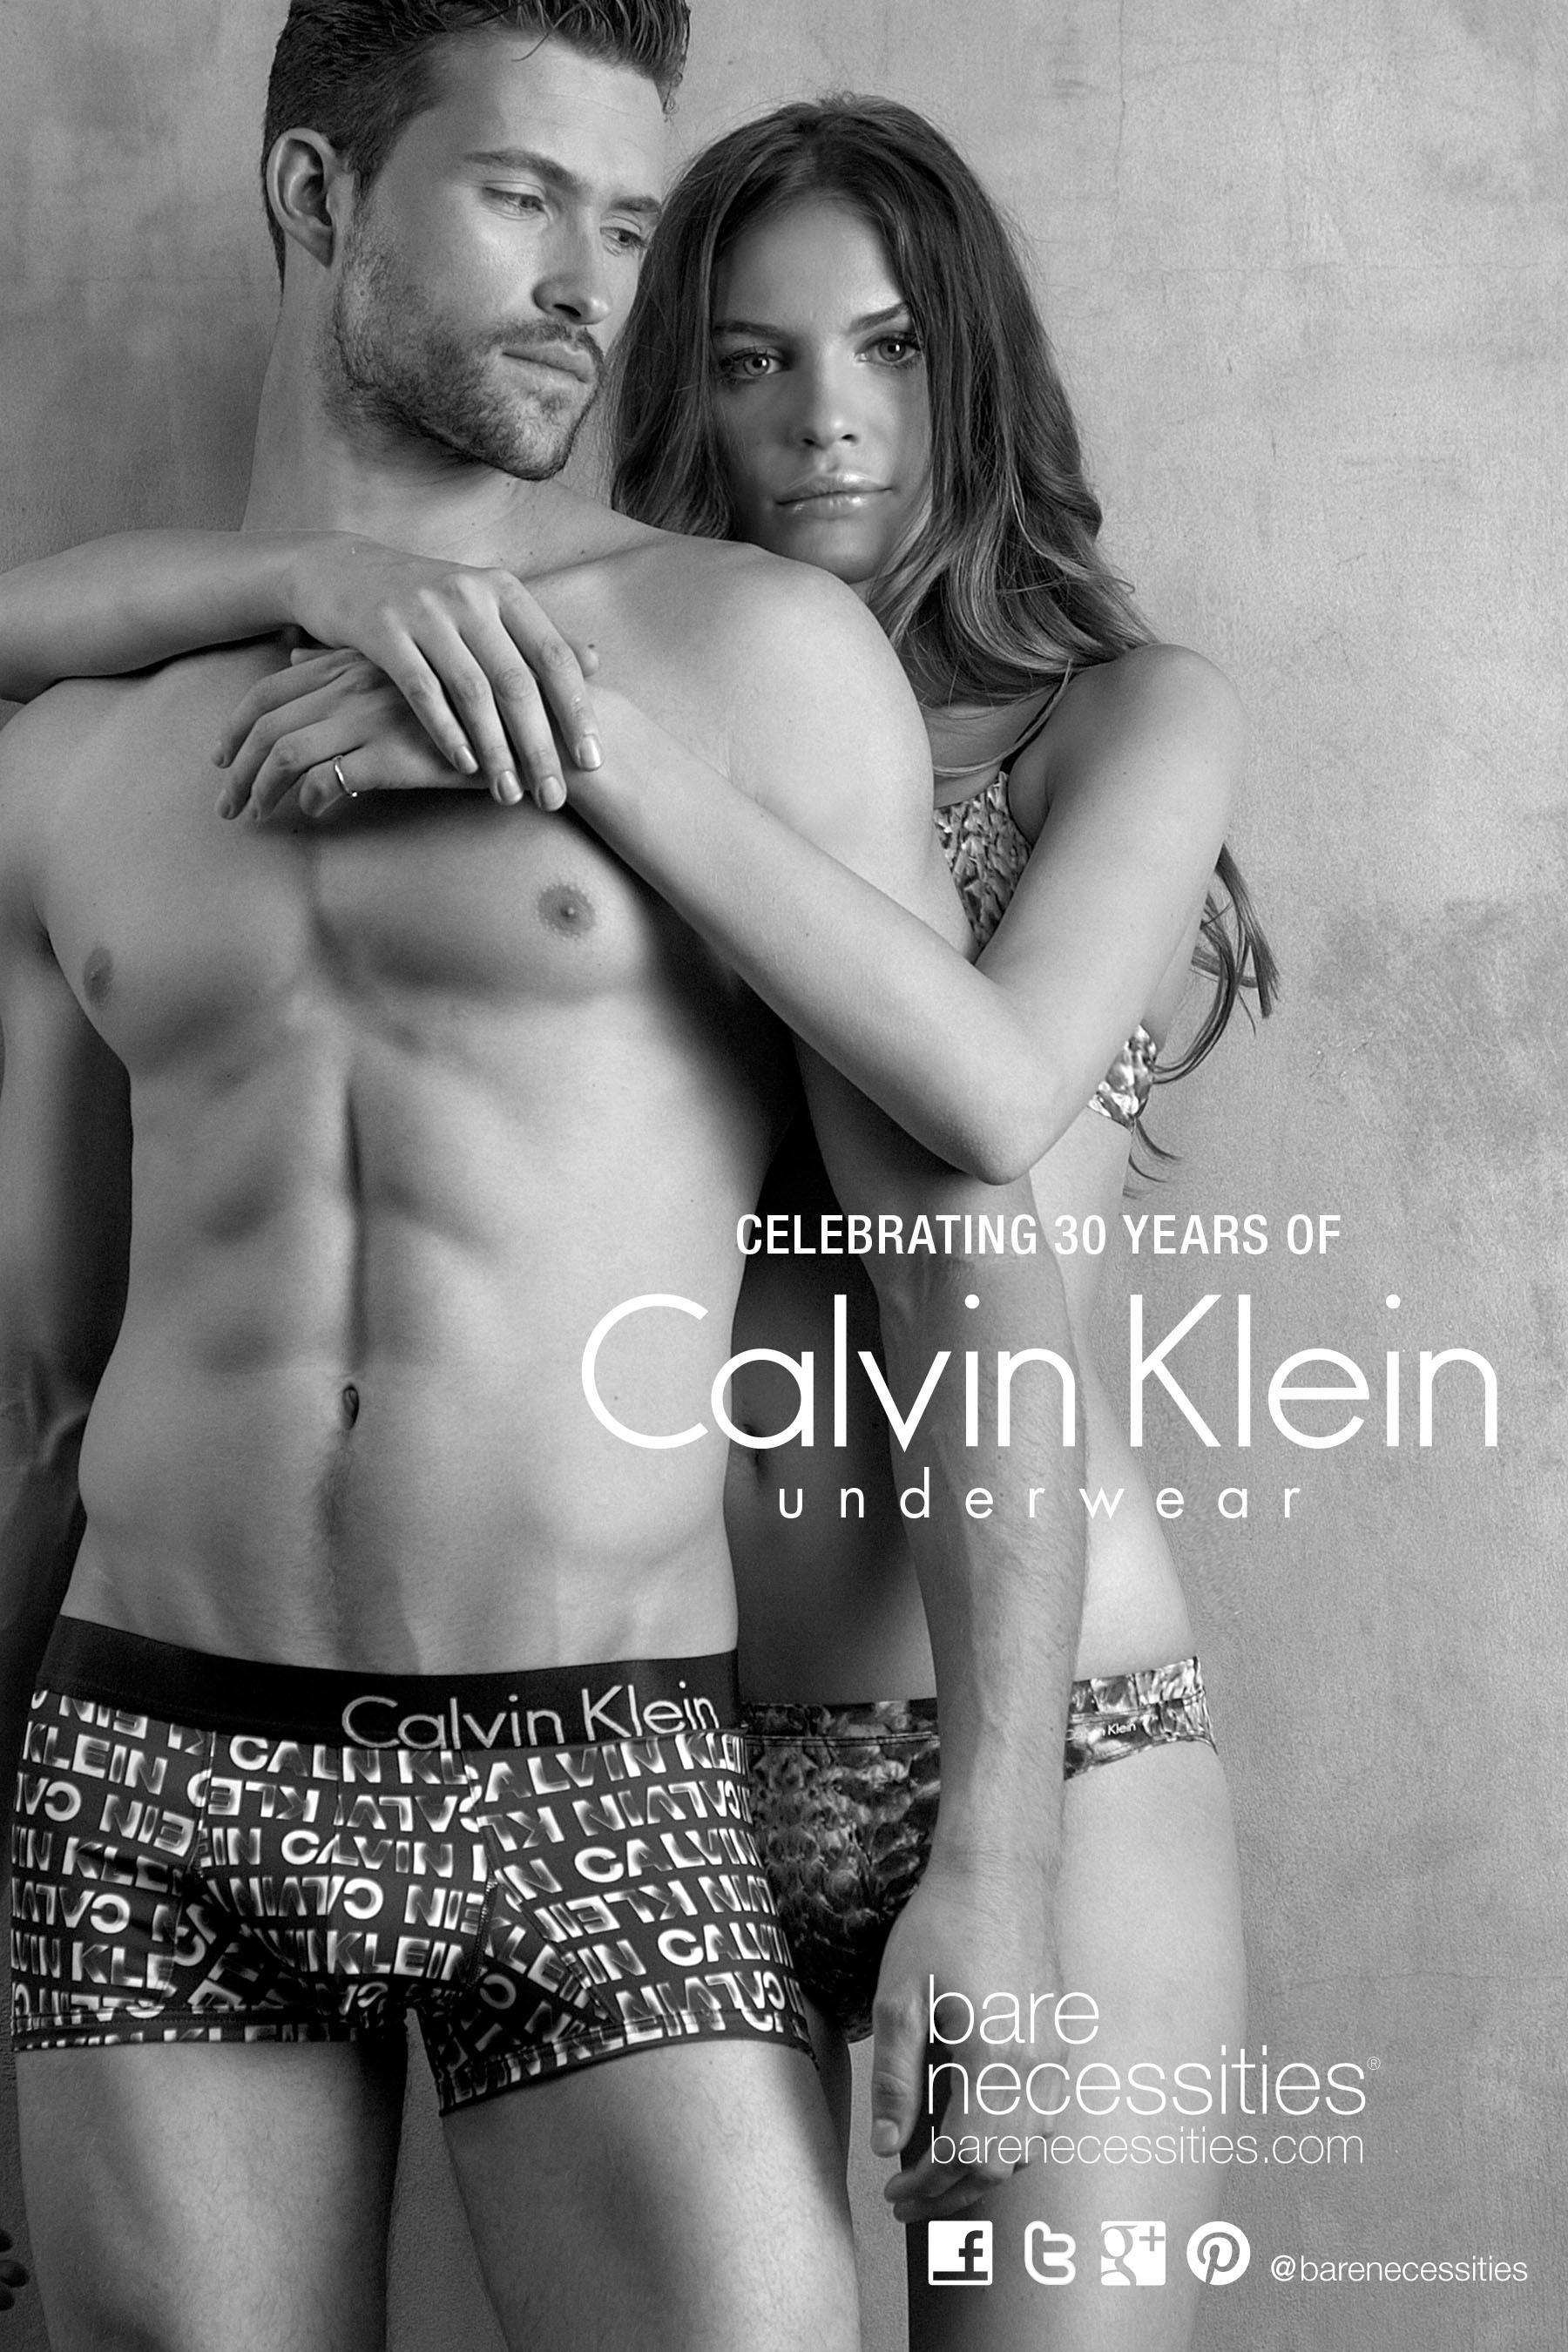 Your Calvin Klein's Are Showing, Sensual chemistry captured…